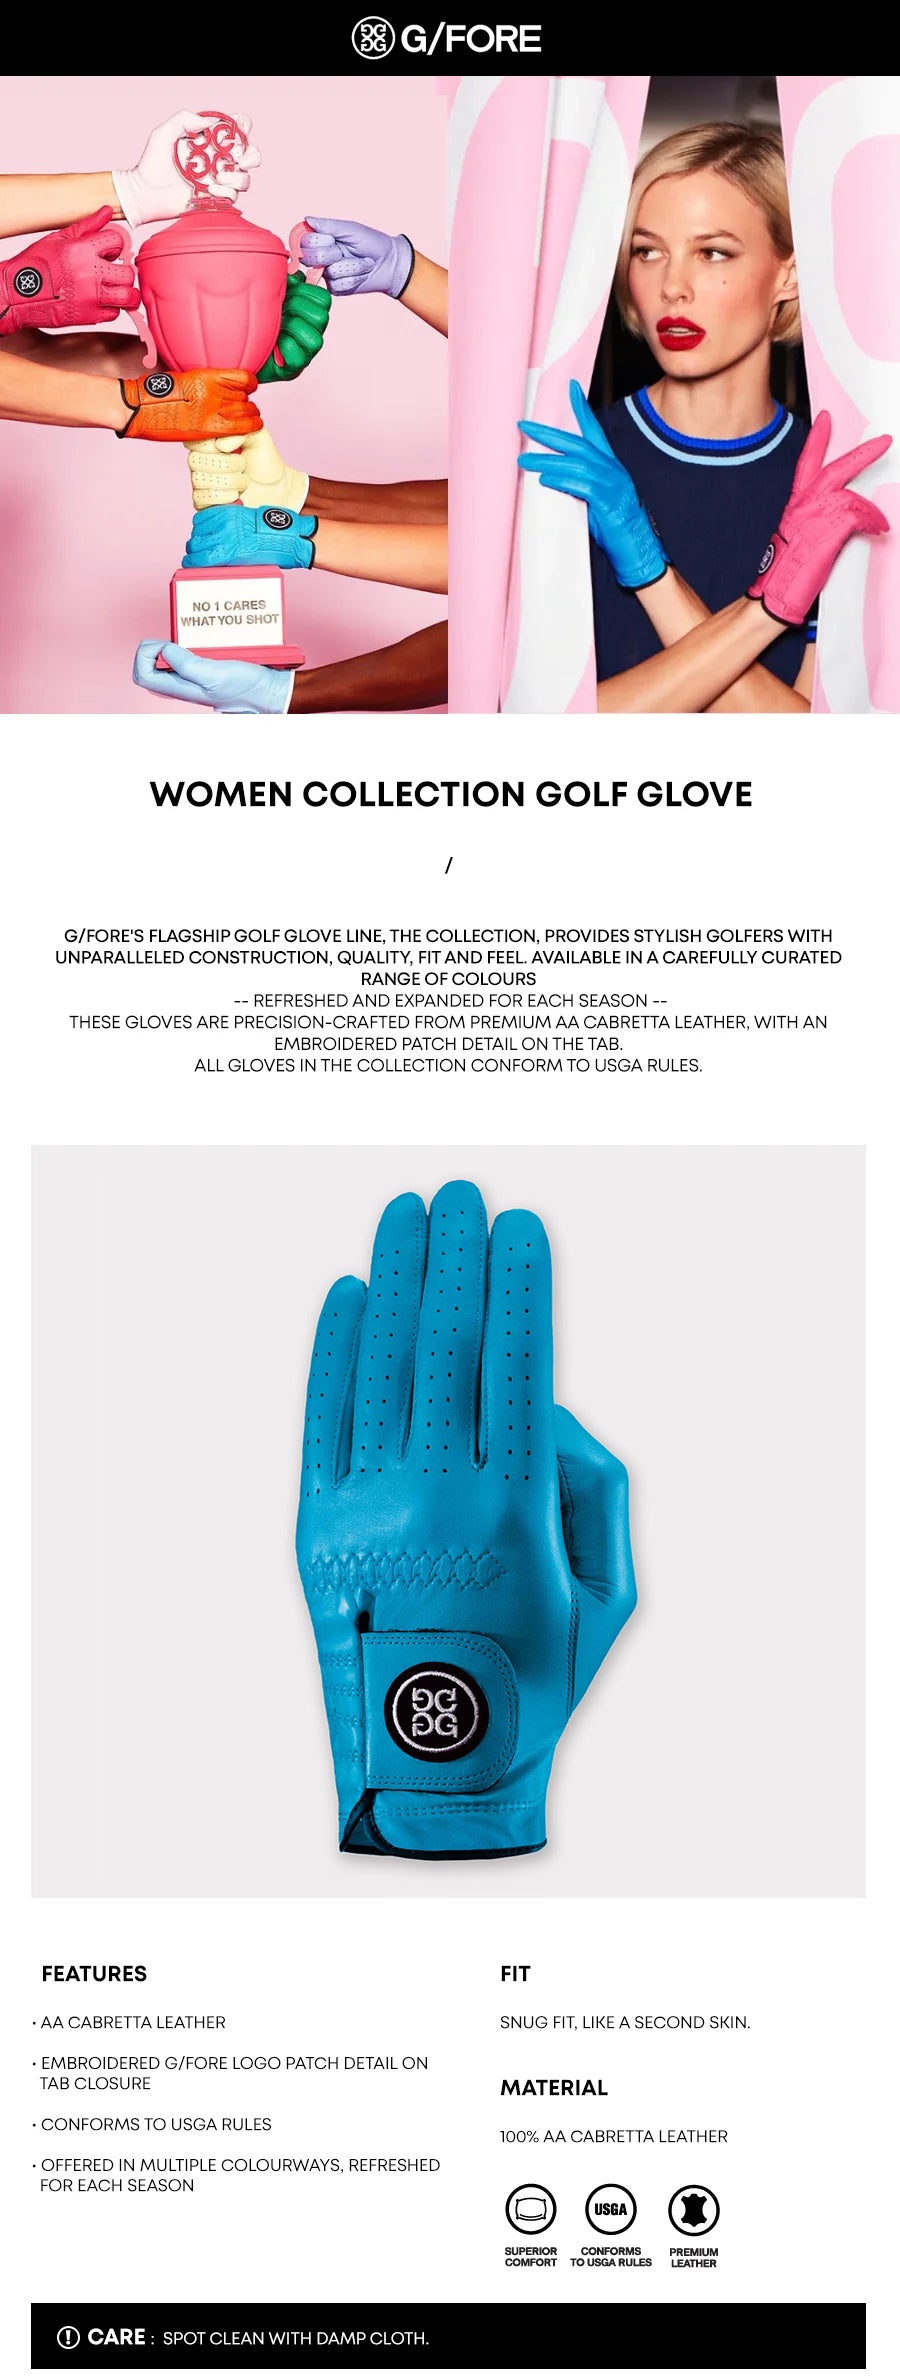 gfore-women-collection-golf-glove-pacific